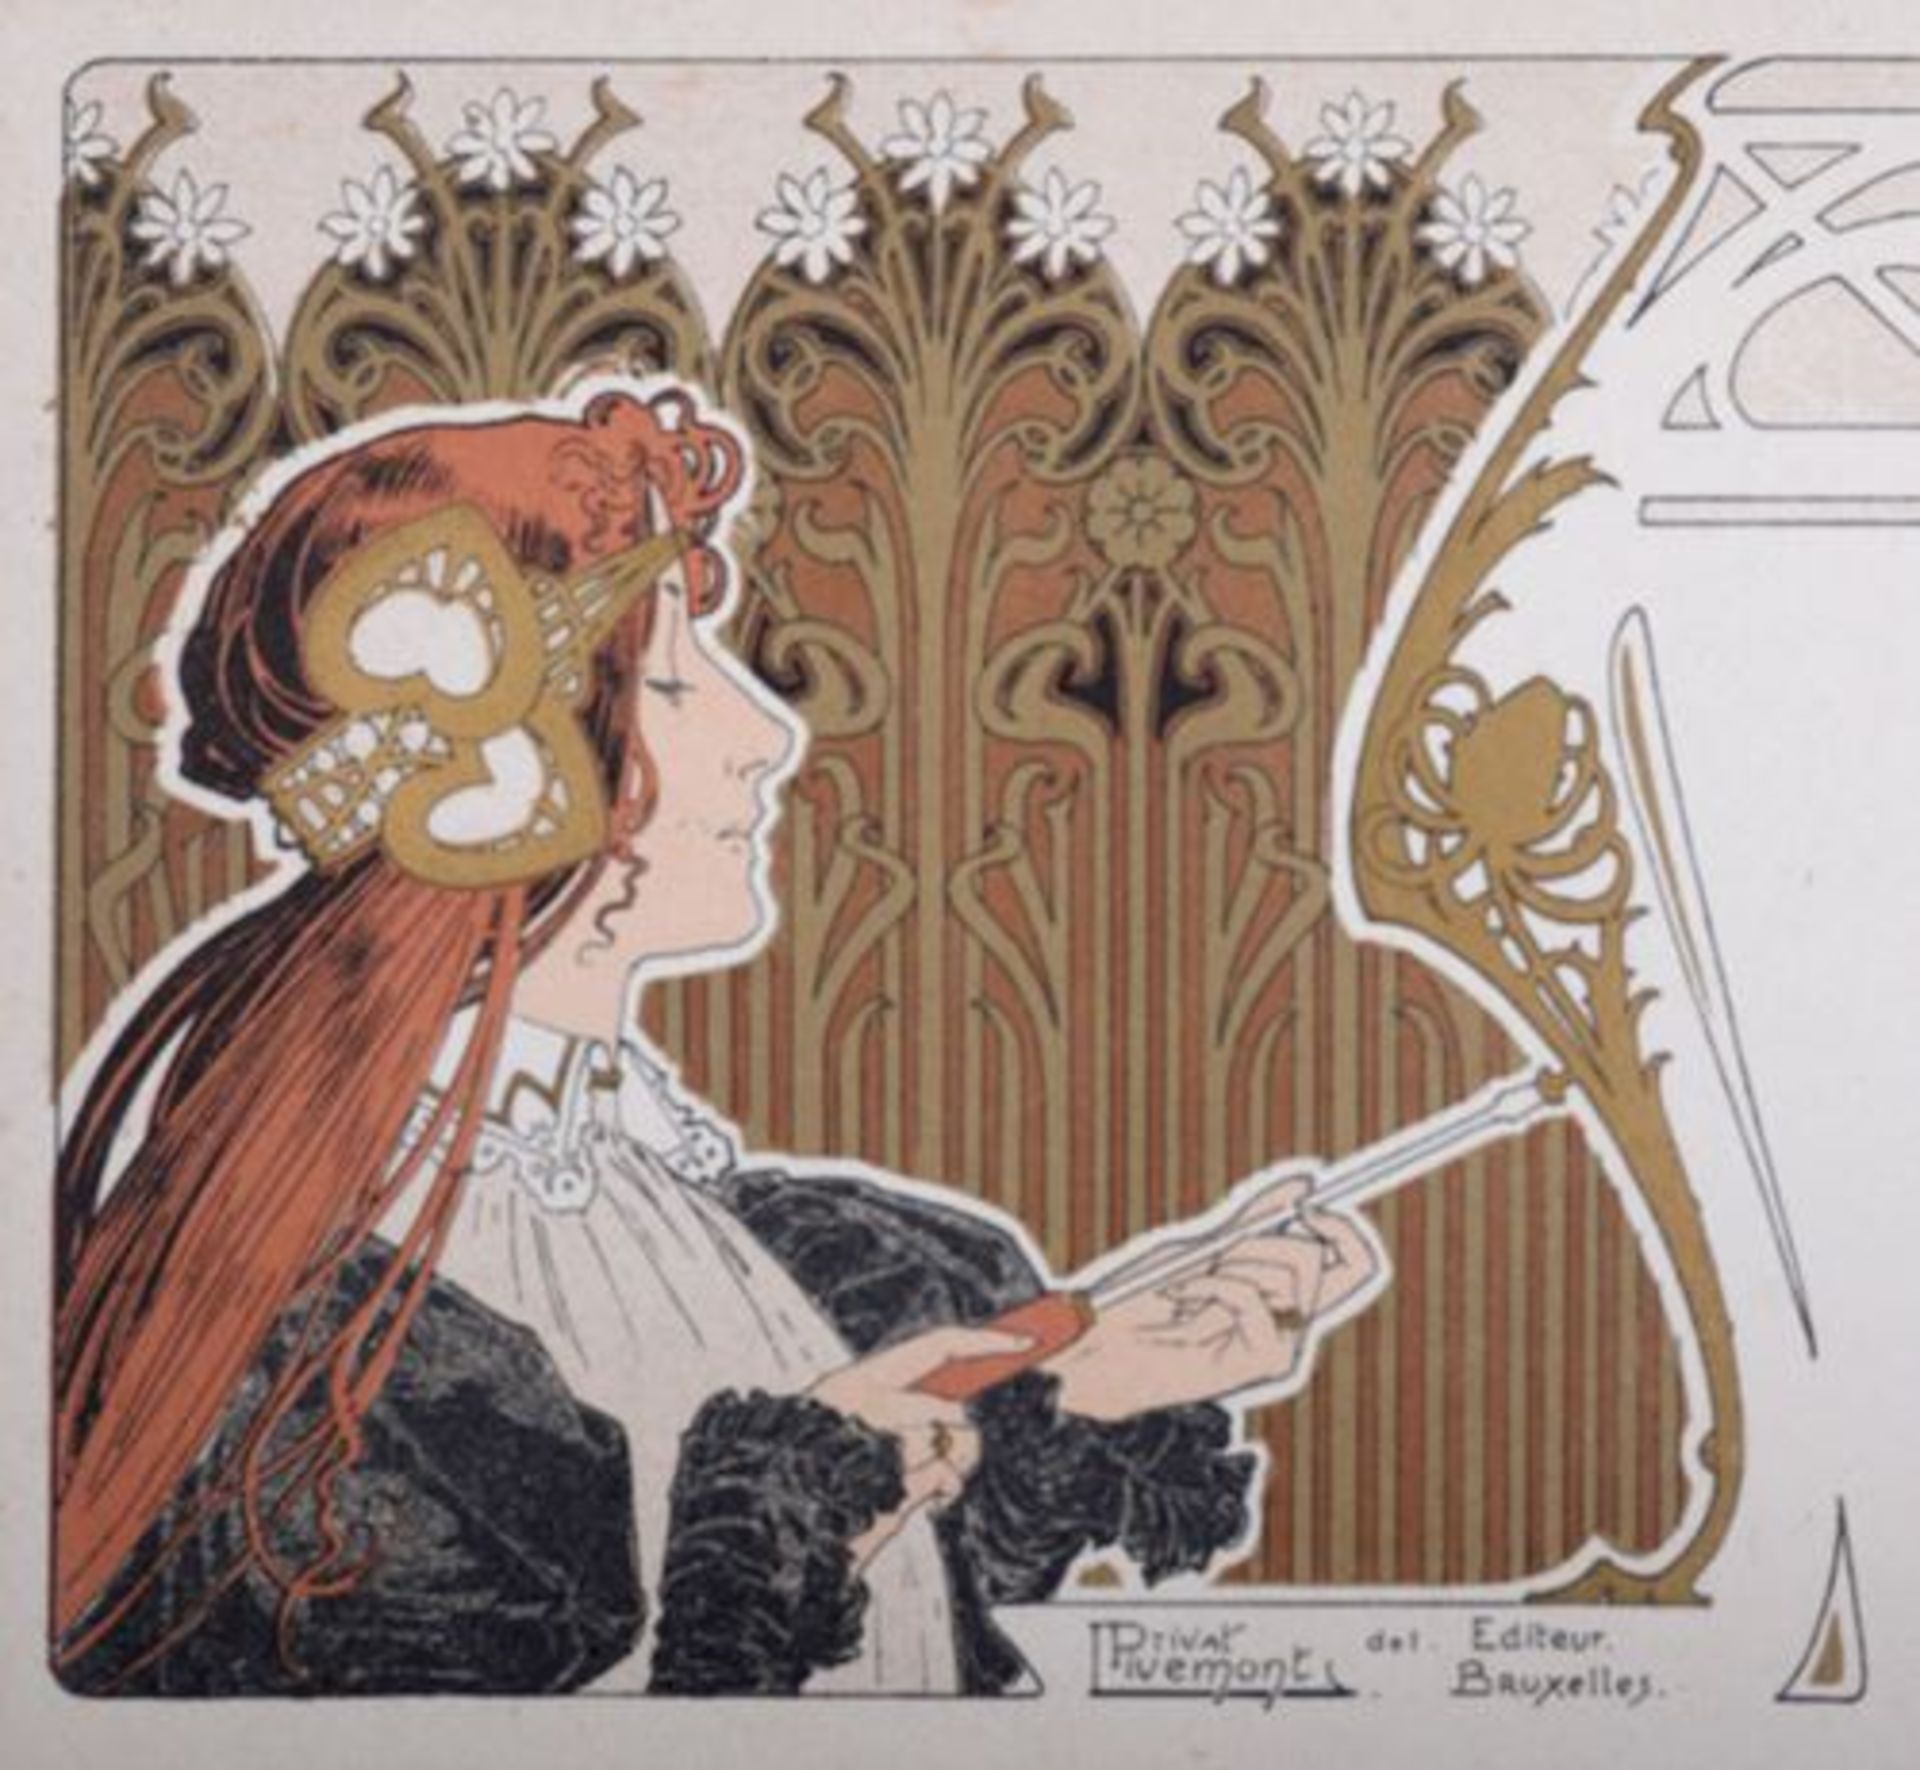 Privat Livemont, 1861 - 1936 Ameublement, 1895 Original Lithograph print with gold [...]